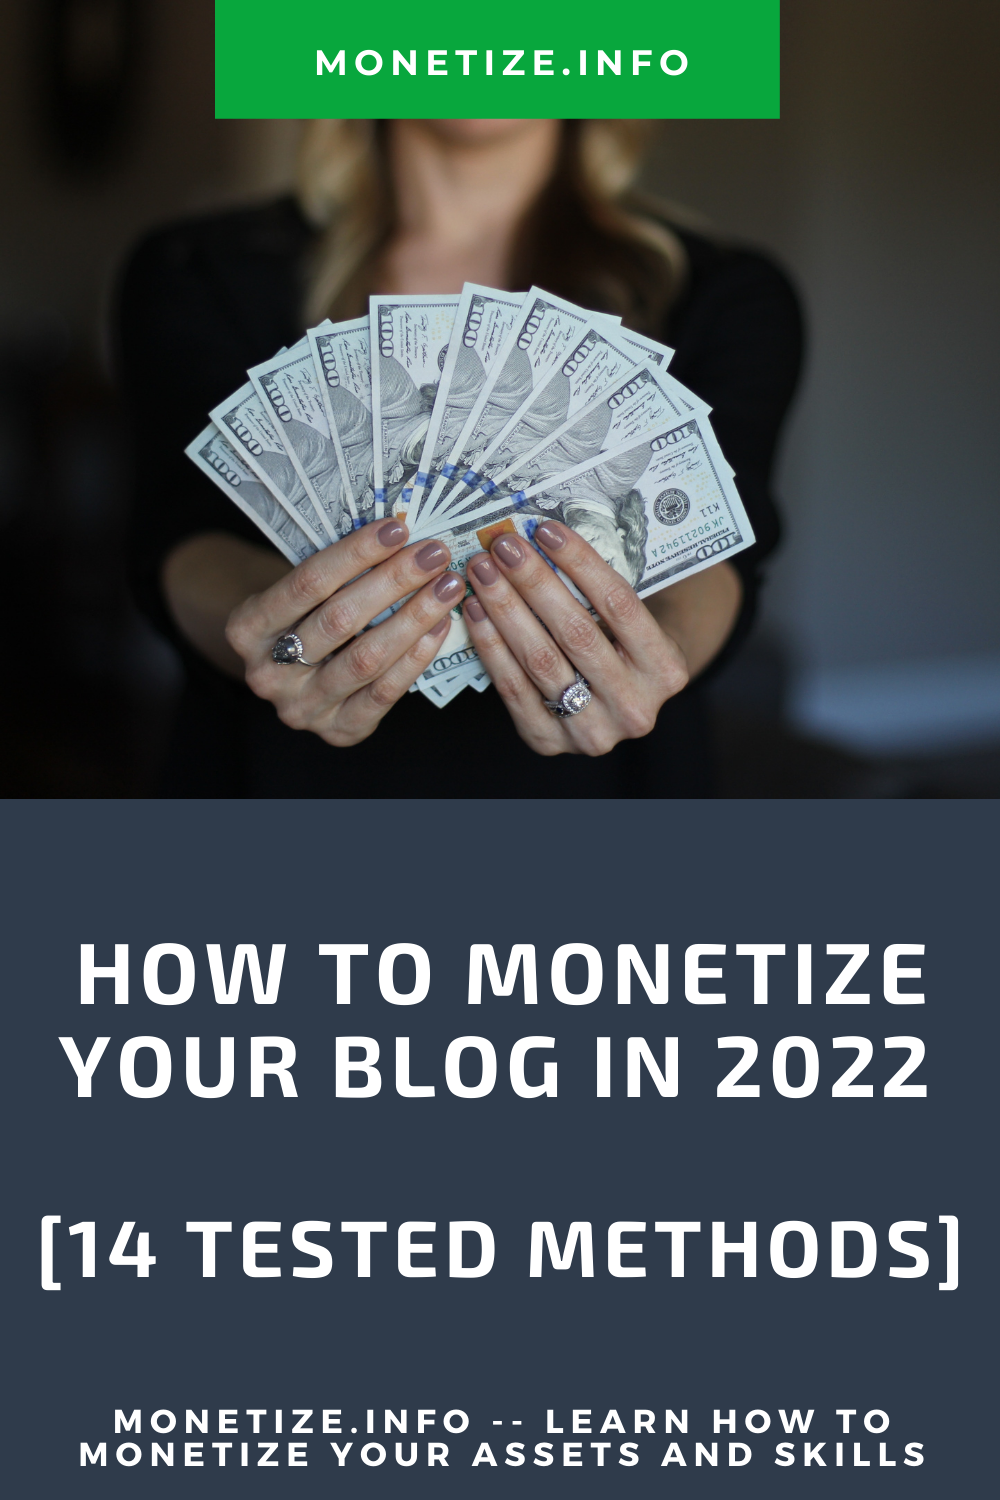 How To Monetize Your Blog